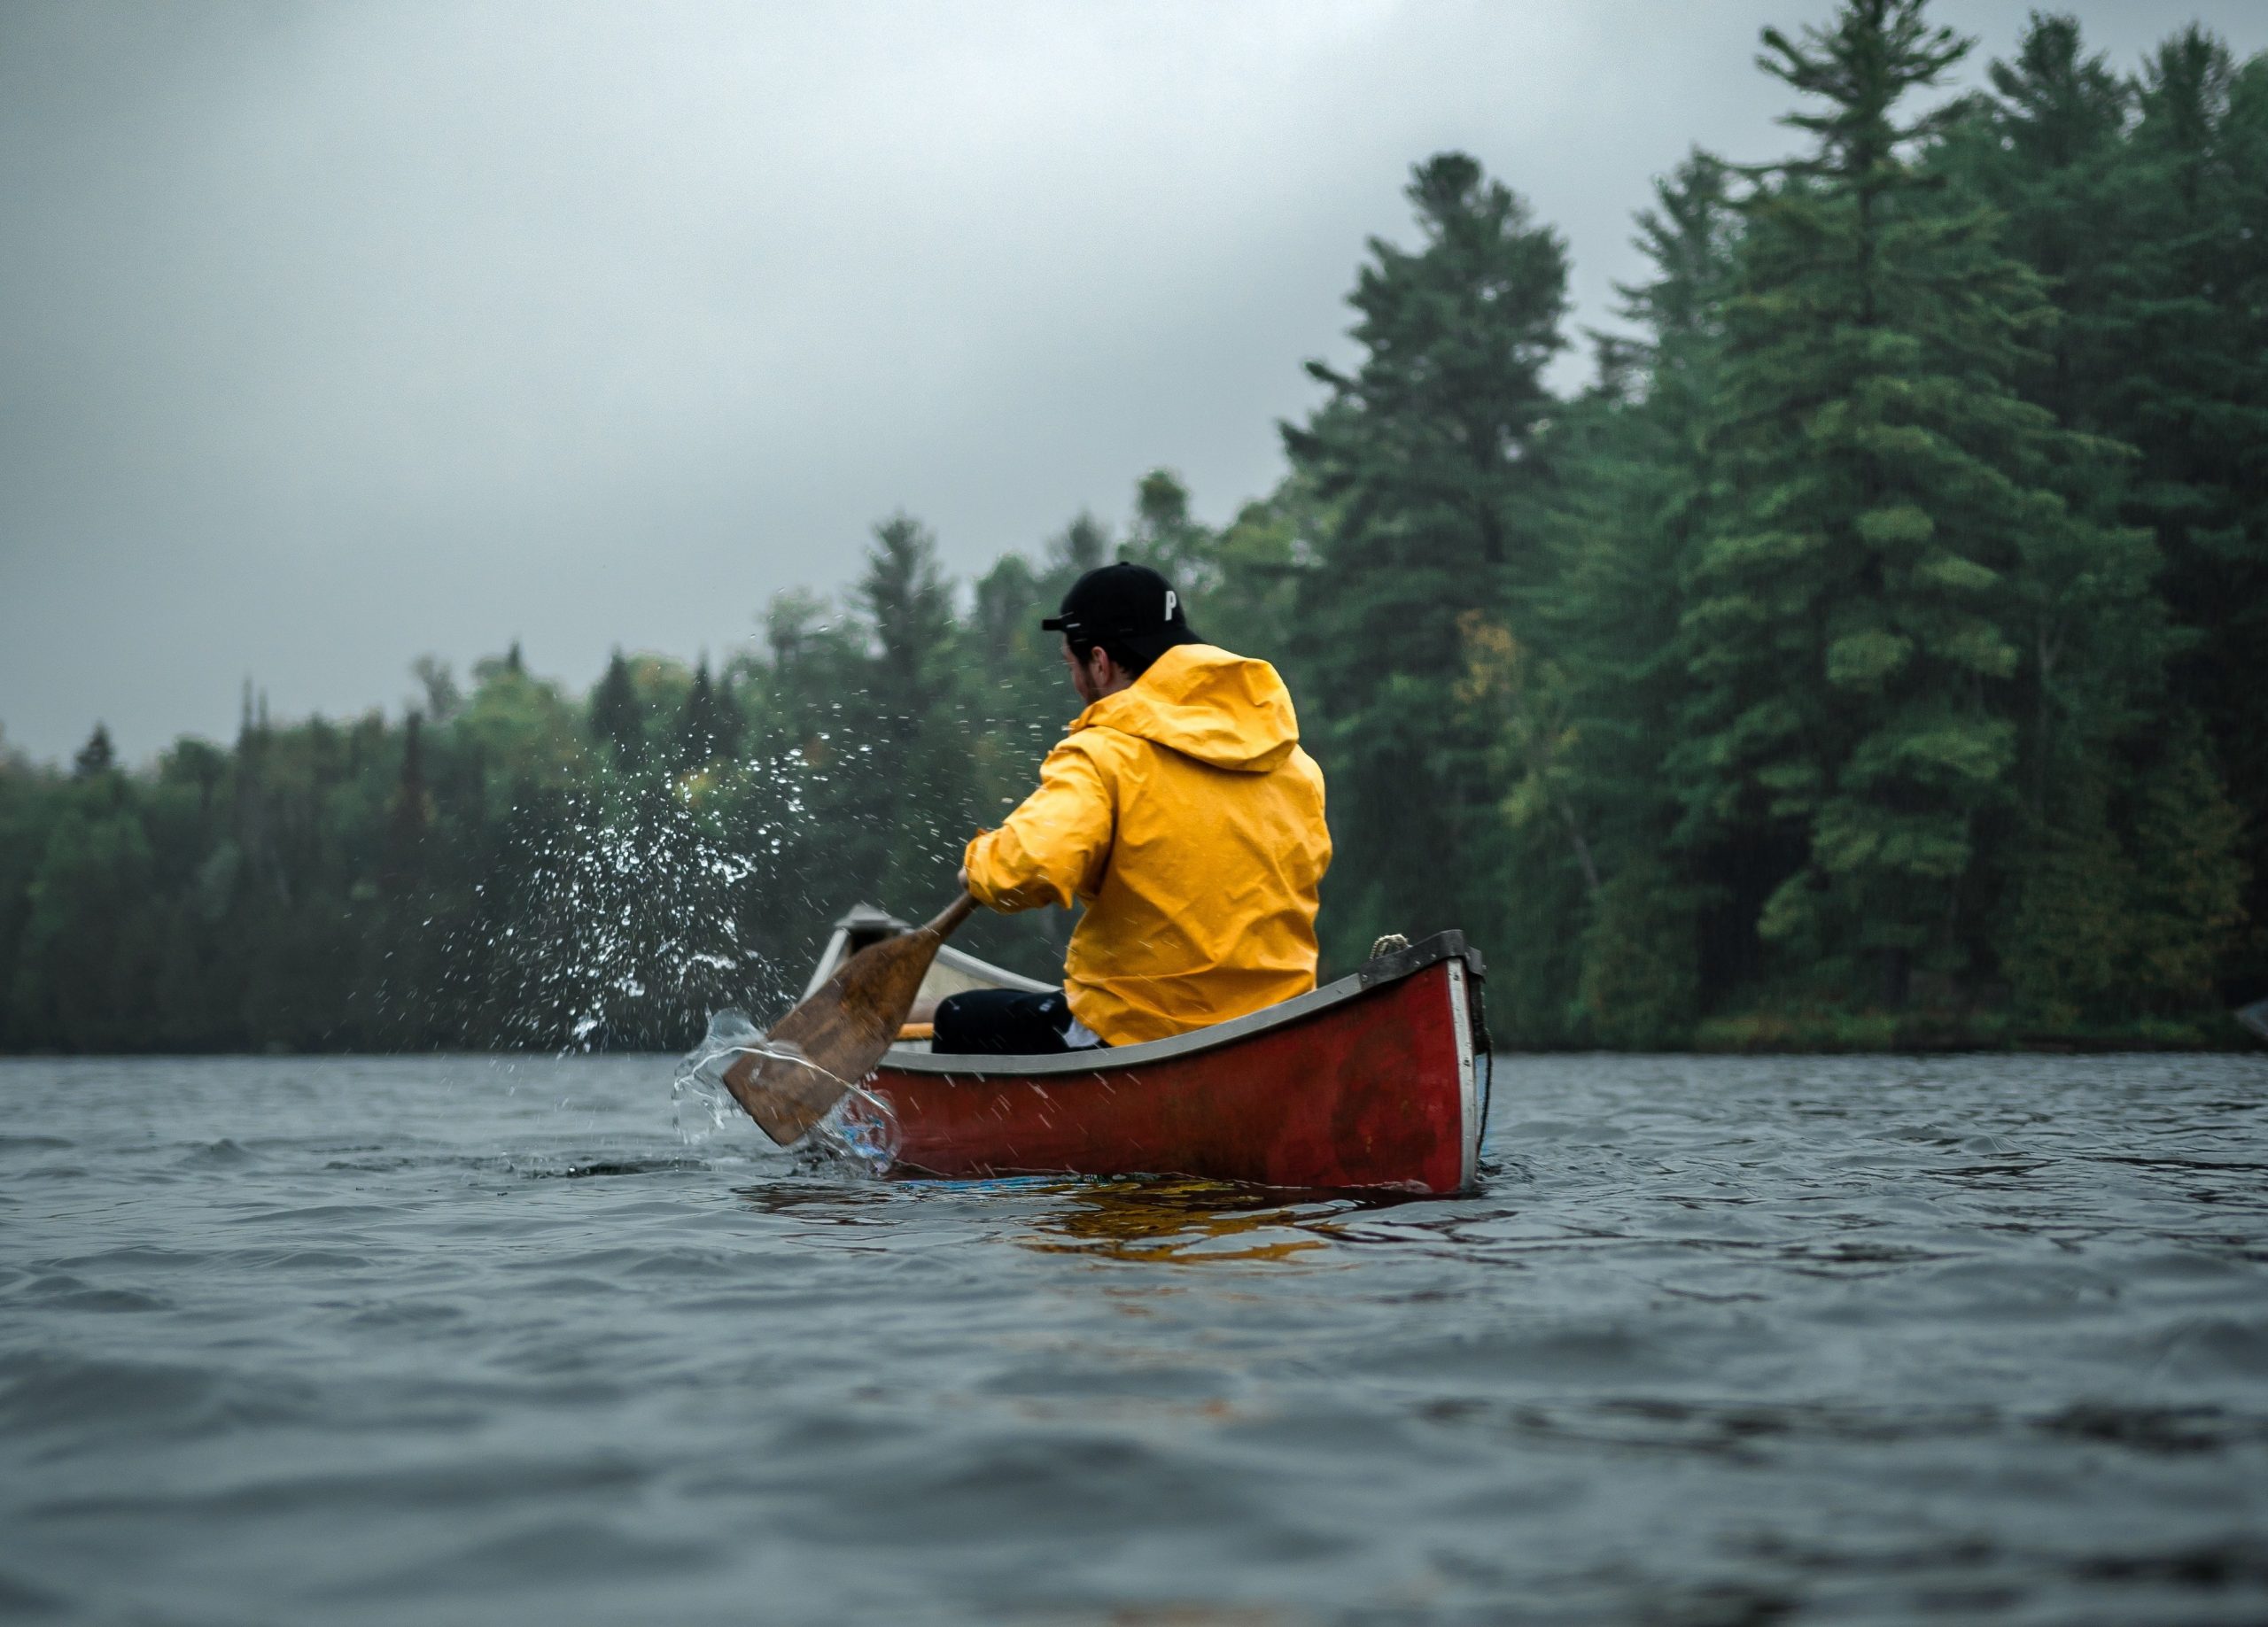 A man wearing a yellow coat paddles his red canoe on the water